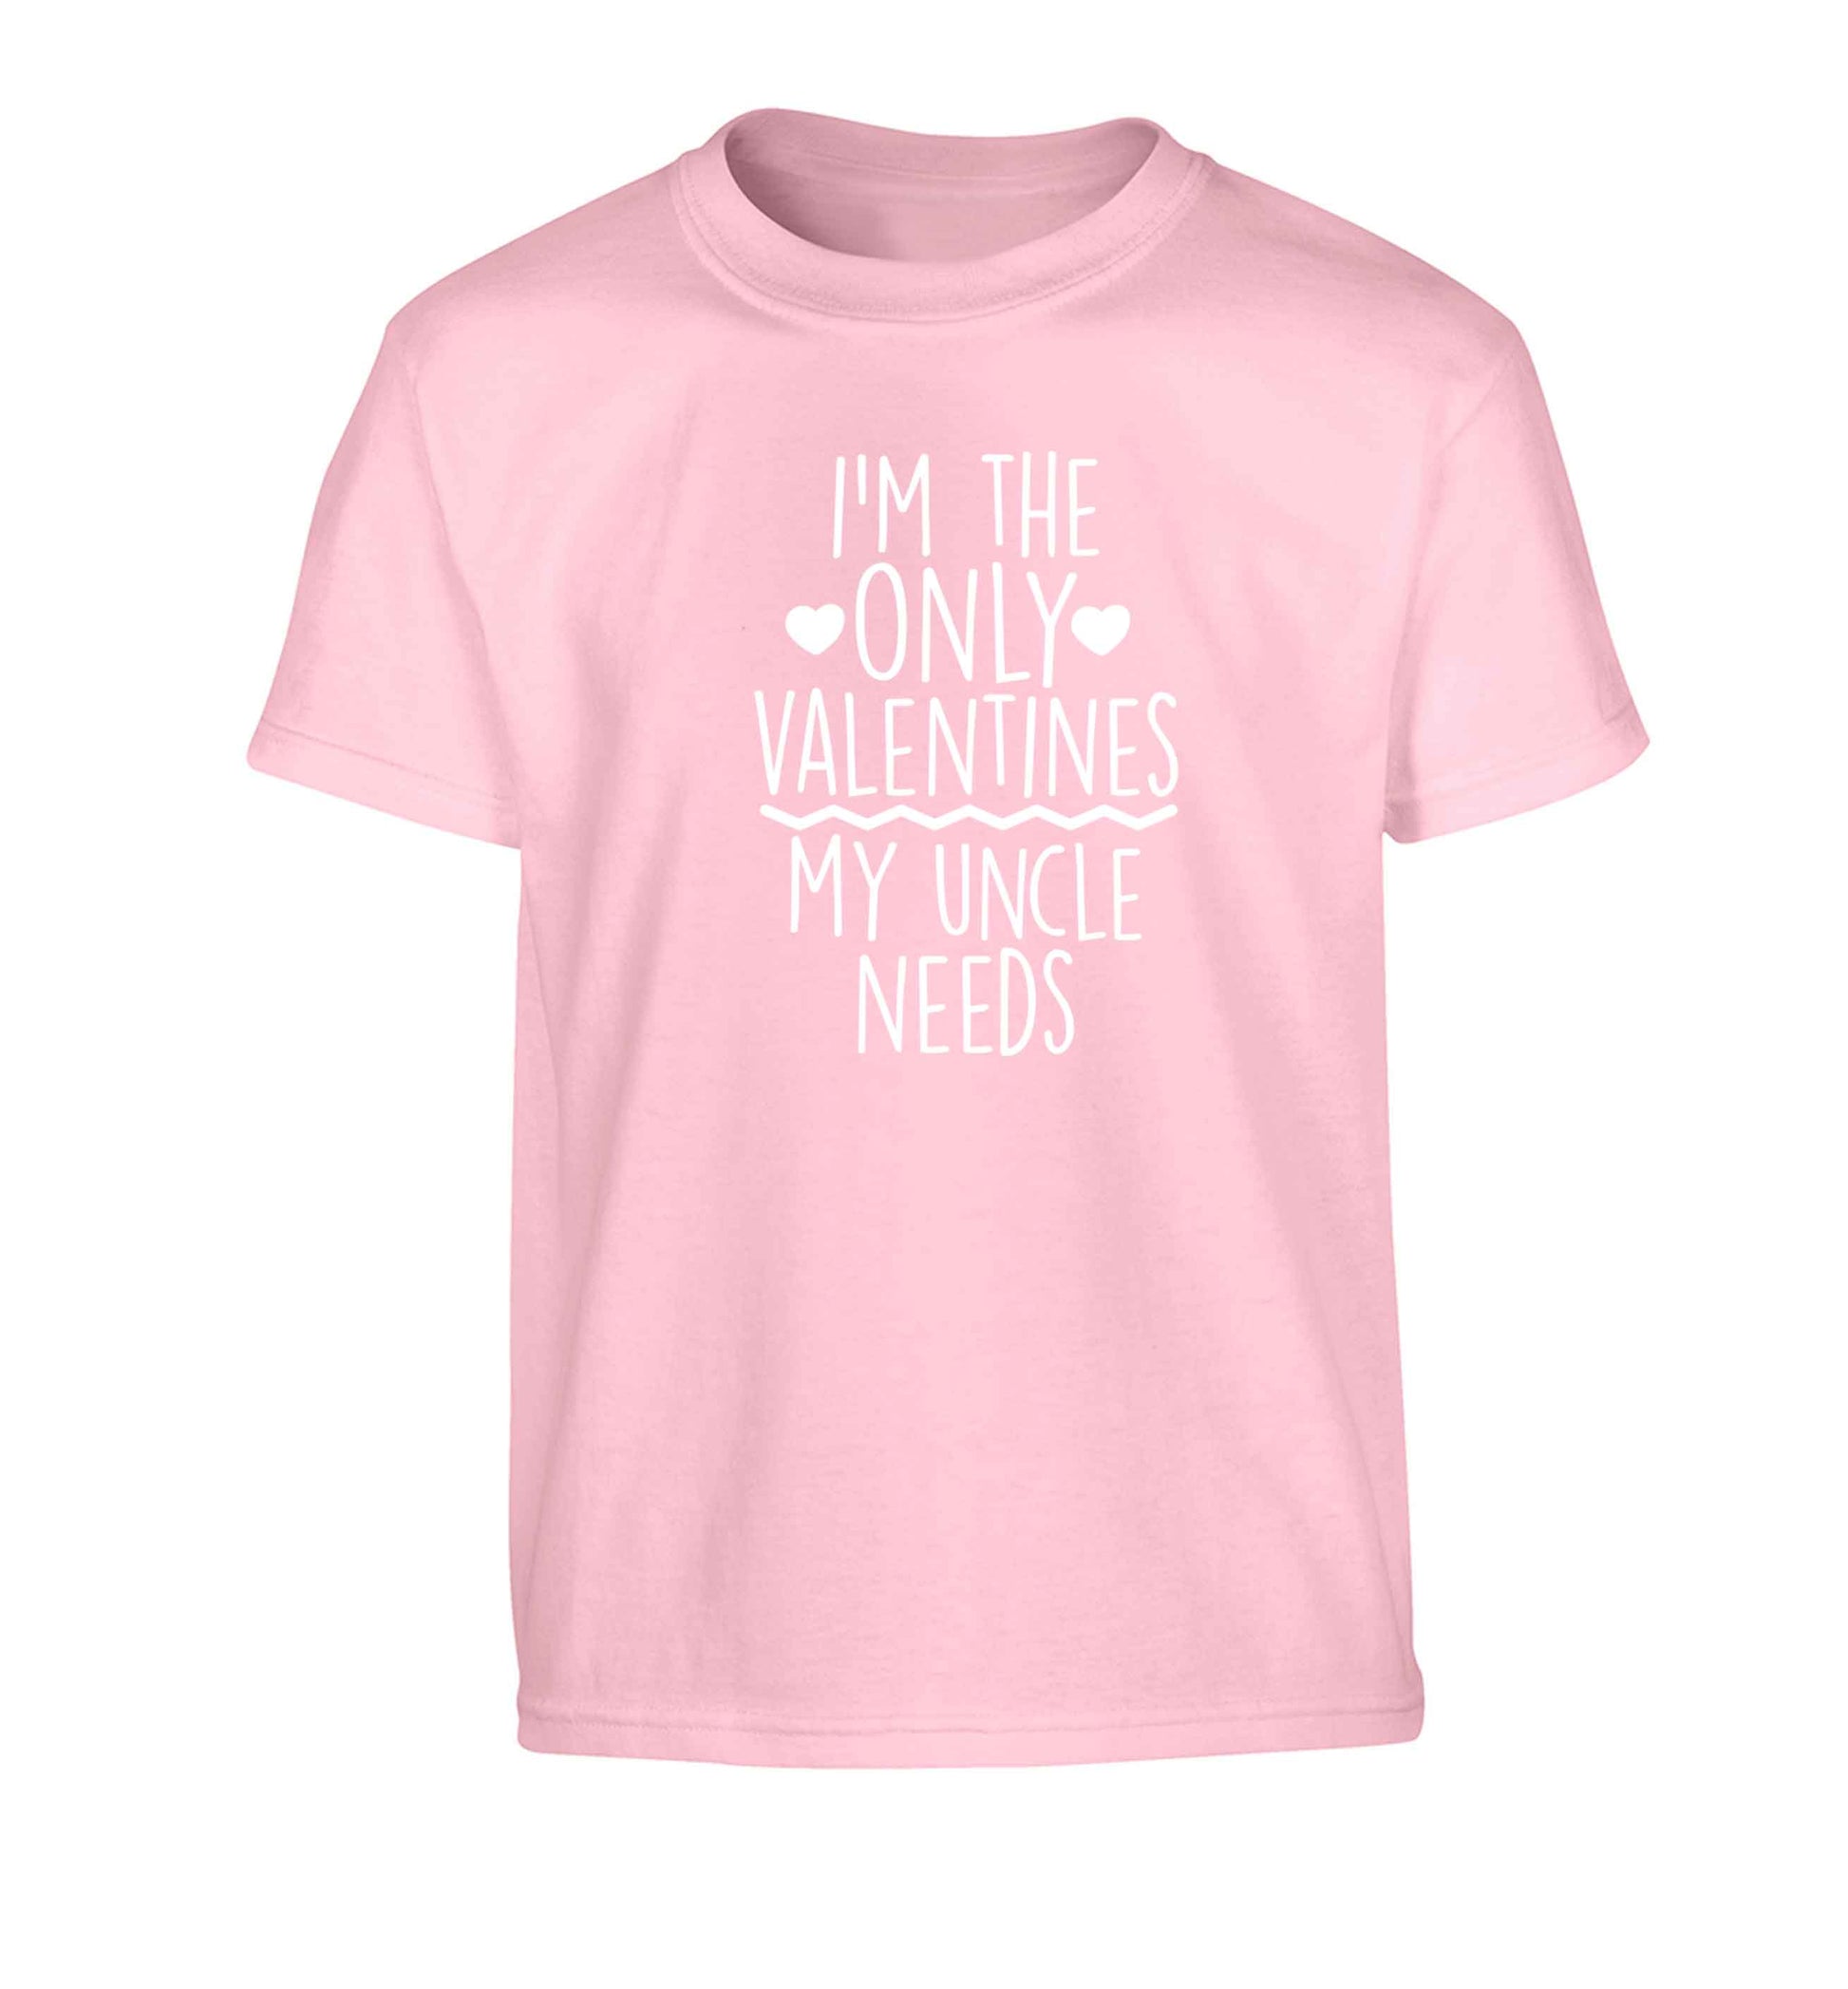 I'm the only valentines my uncle needs Children's light pink Tshirt 12-13 Years